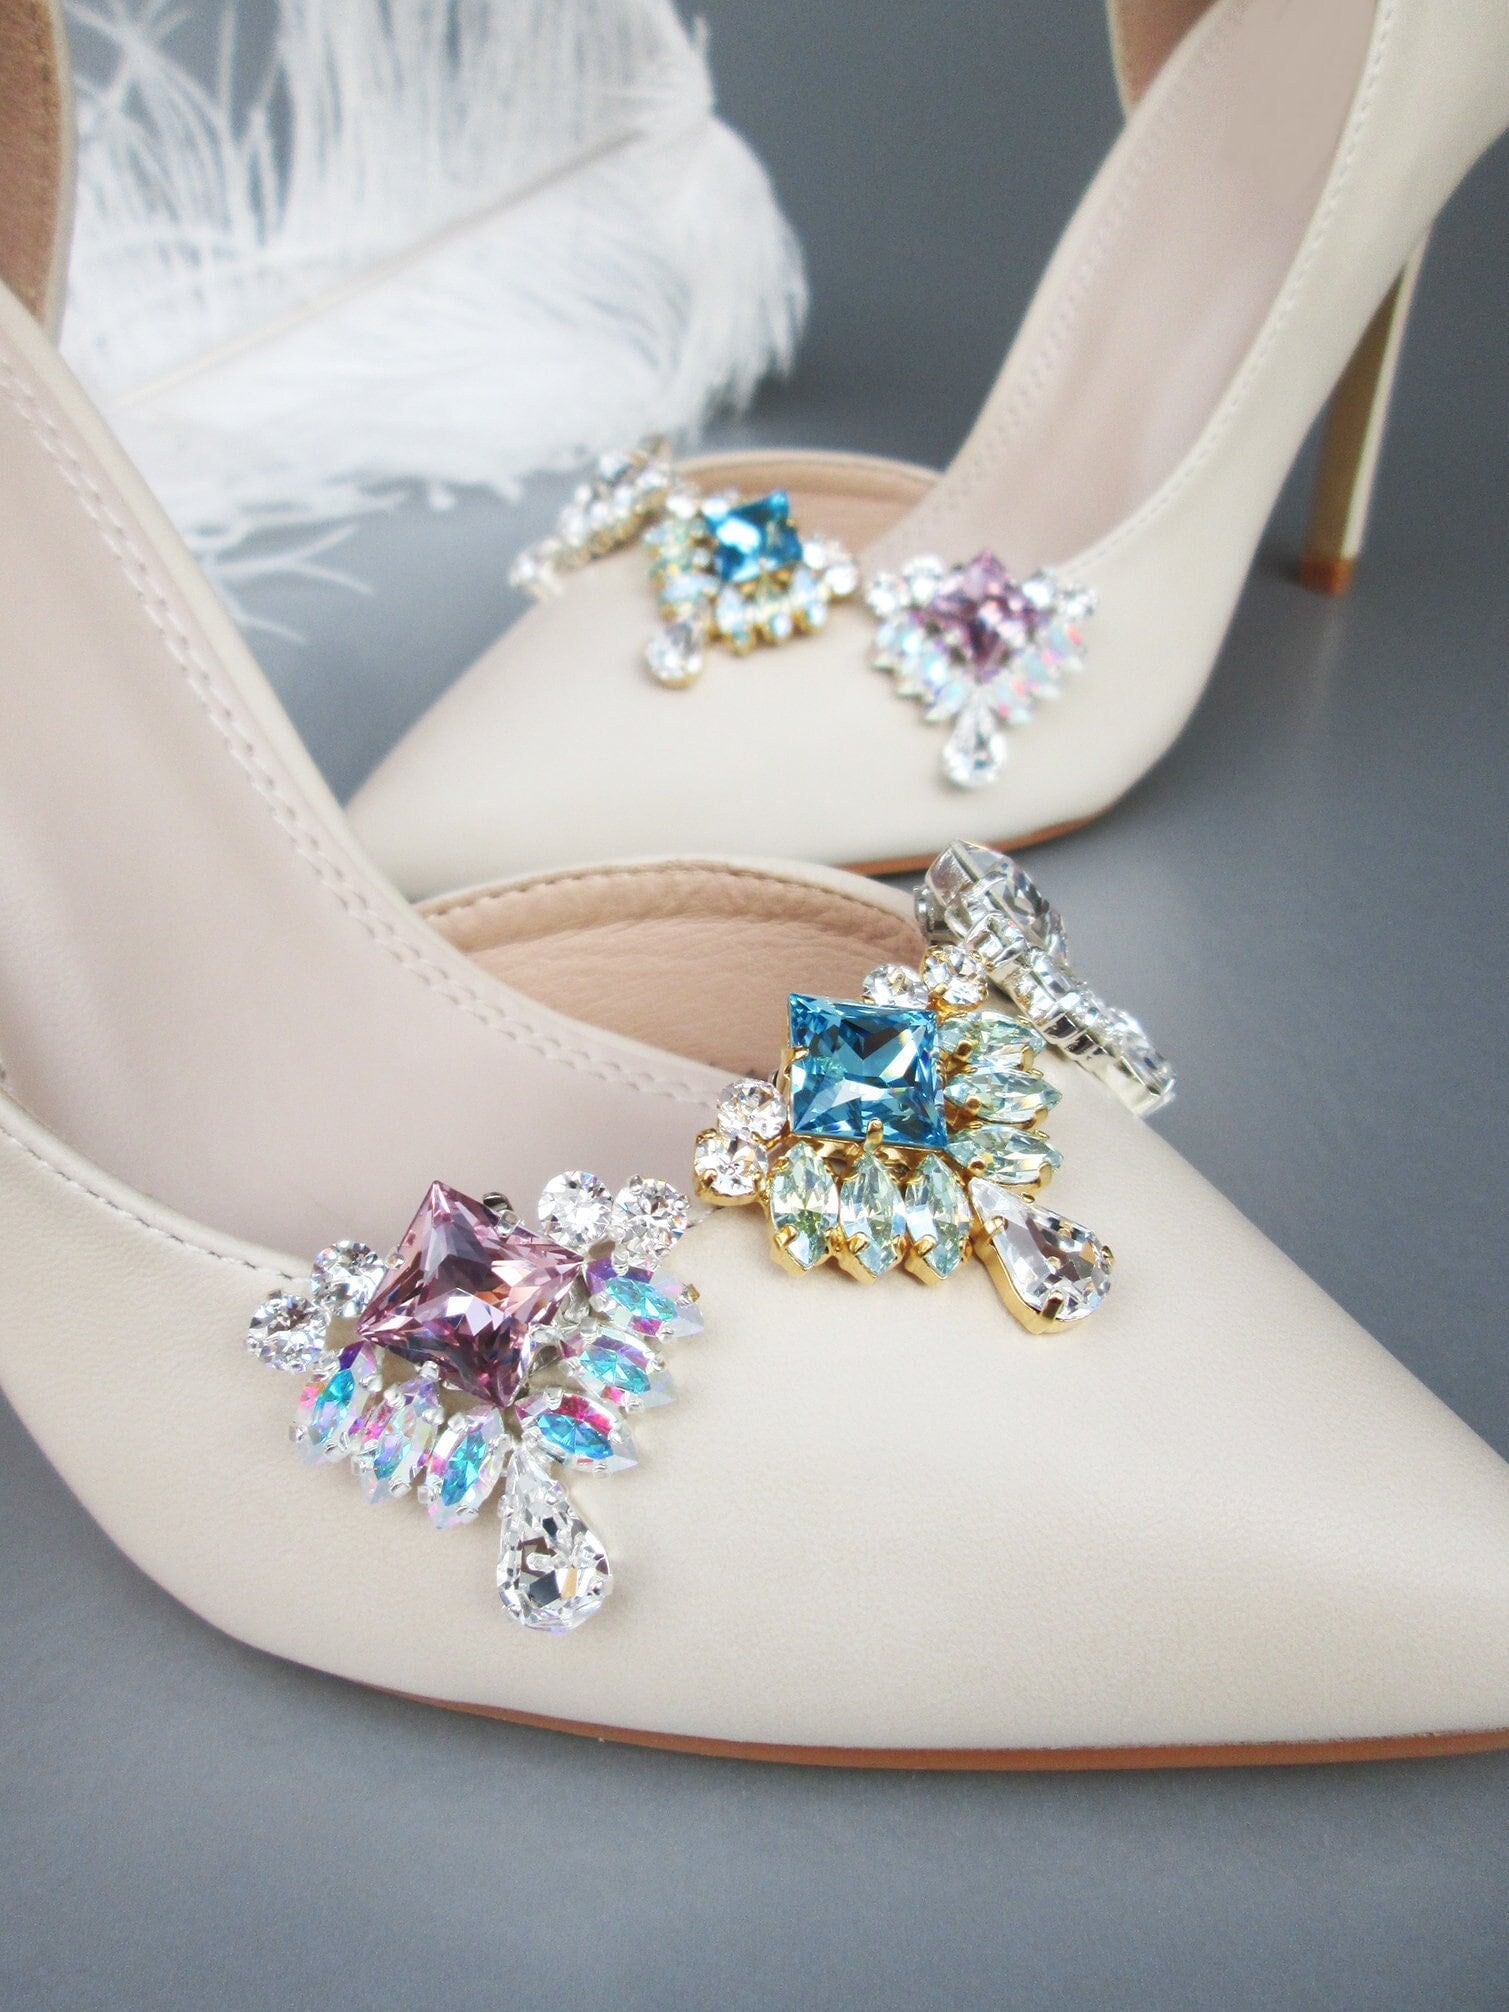  Gold Color Shoe Clips with Rhinestones and White